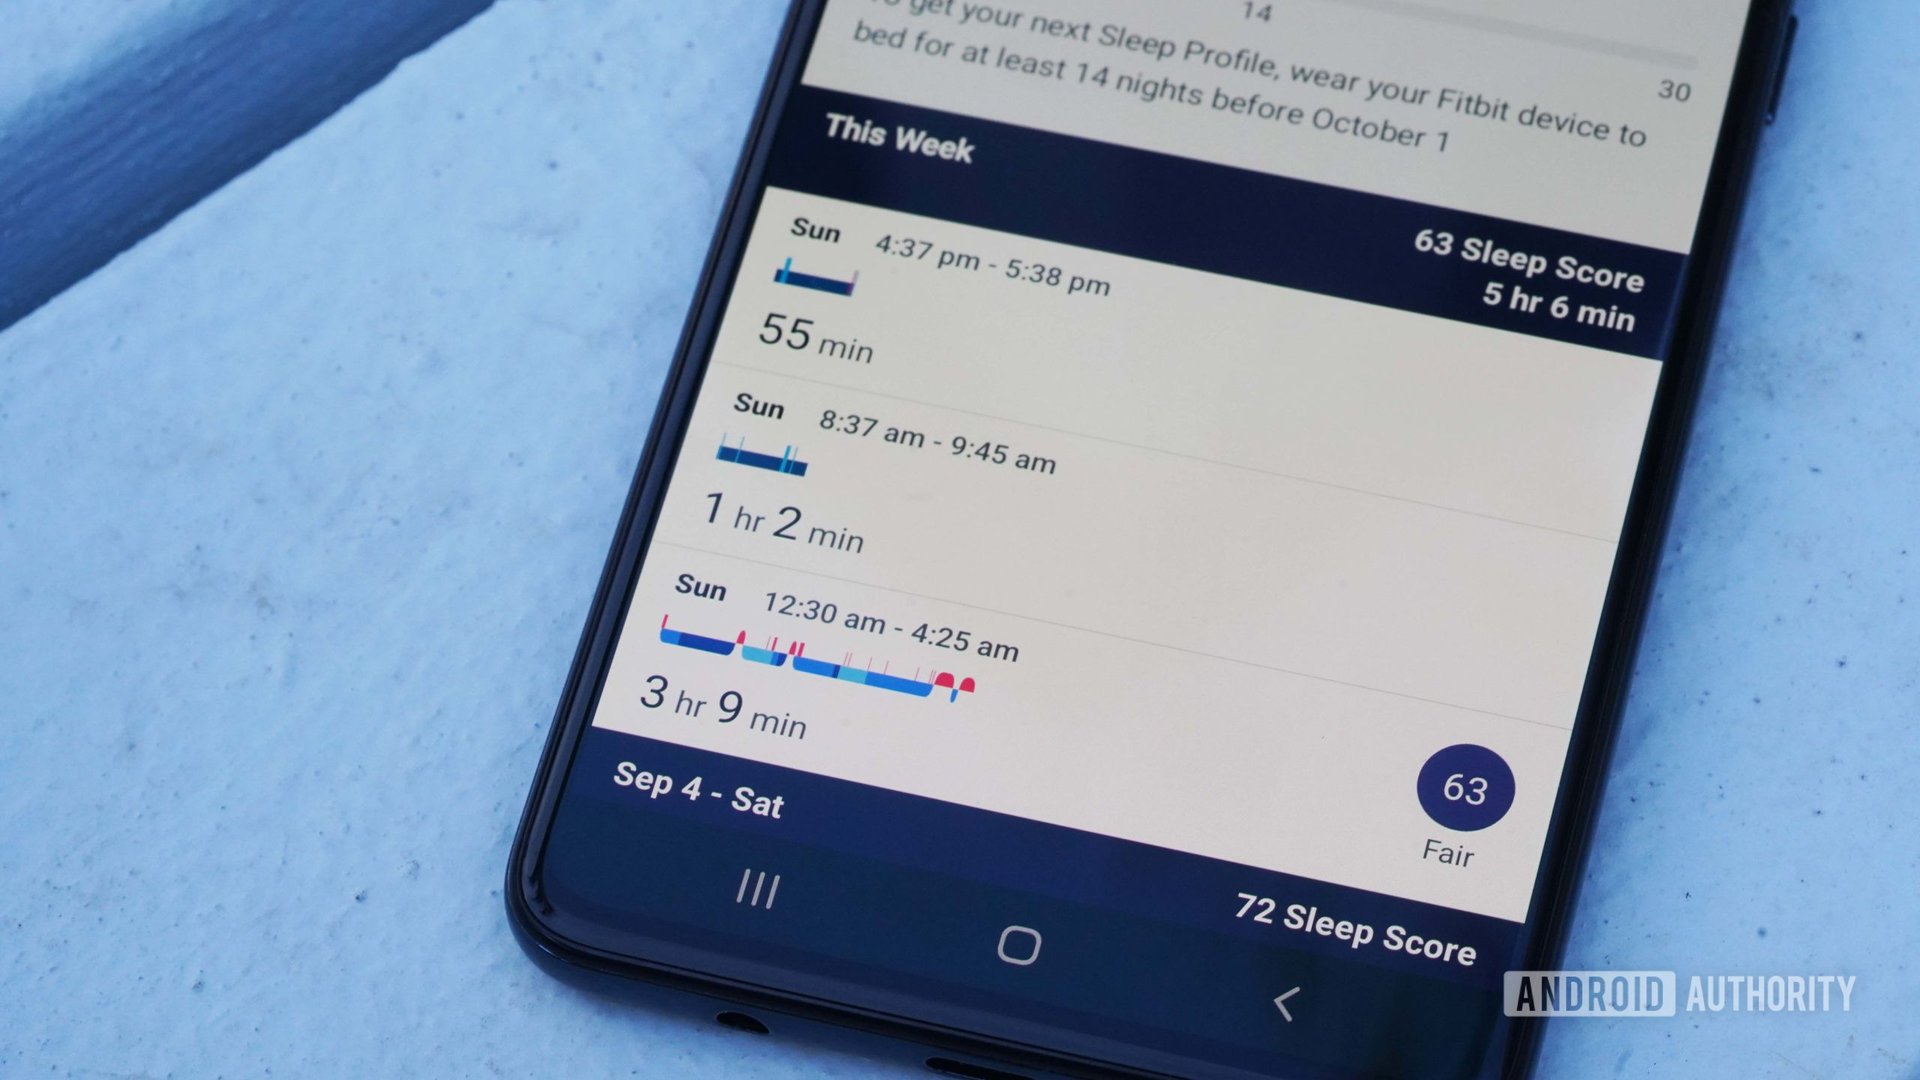 A Samsung Galaxy A51 displays a user's Sleep Score in the Fitbit app.